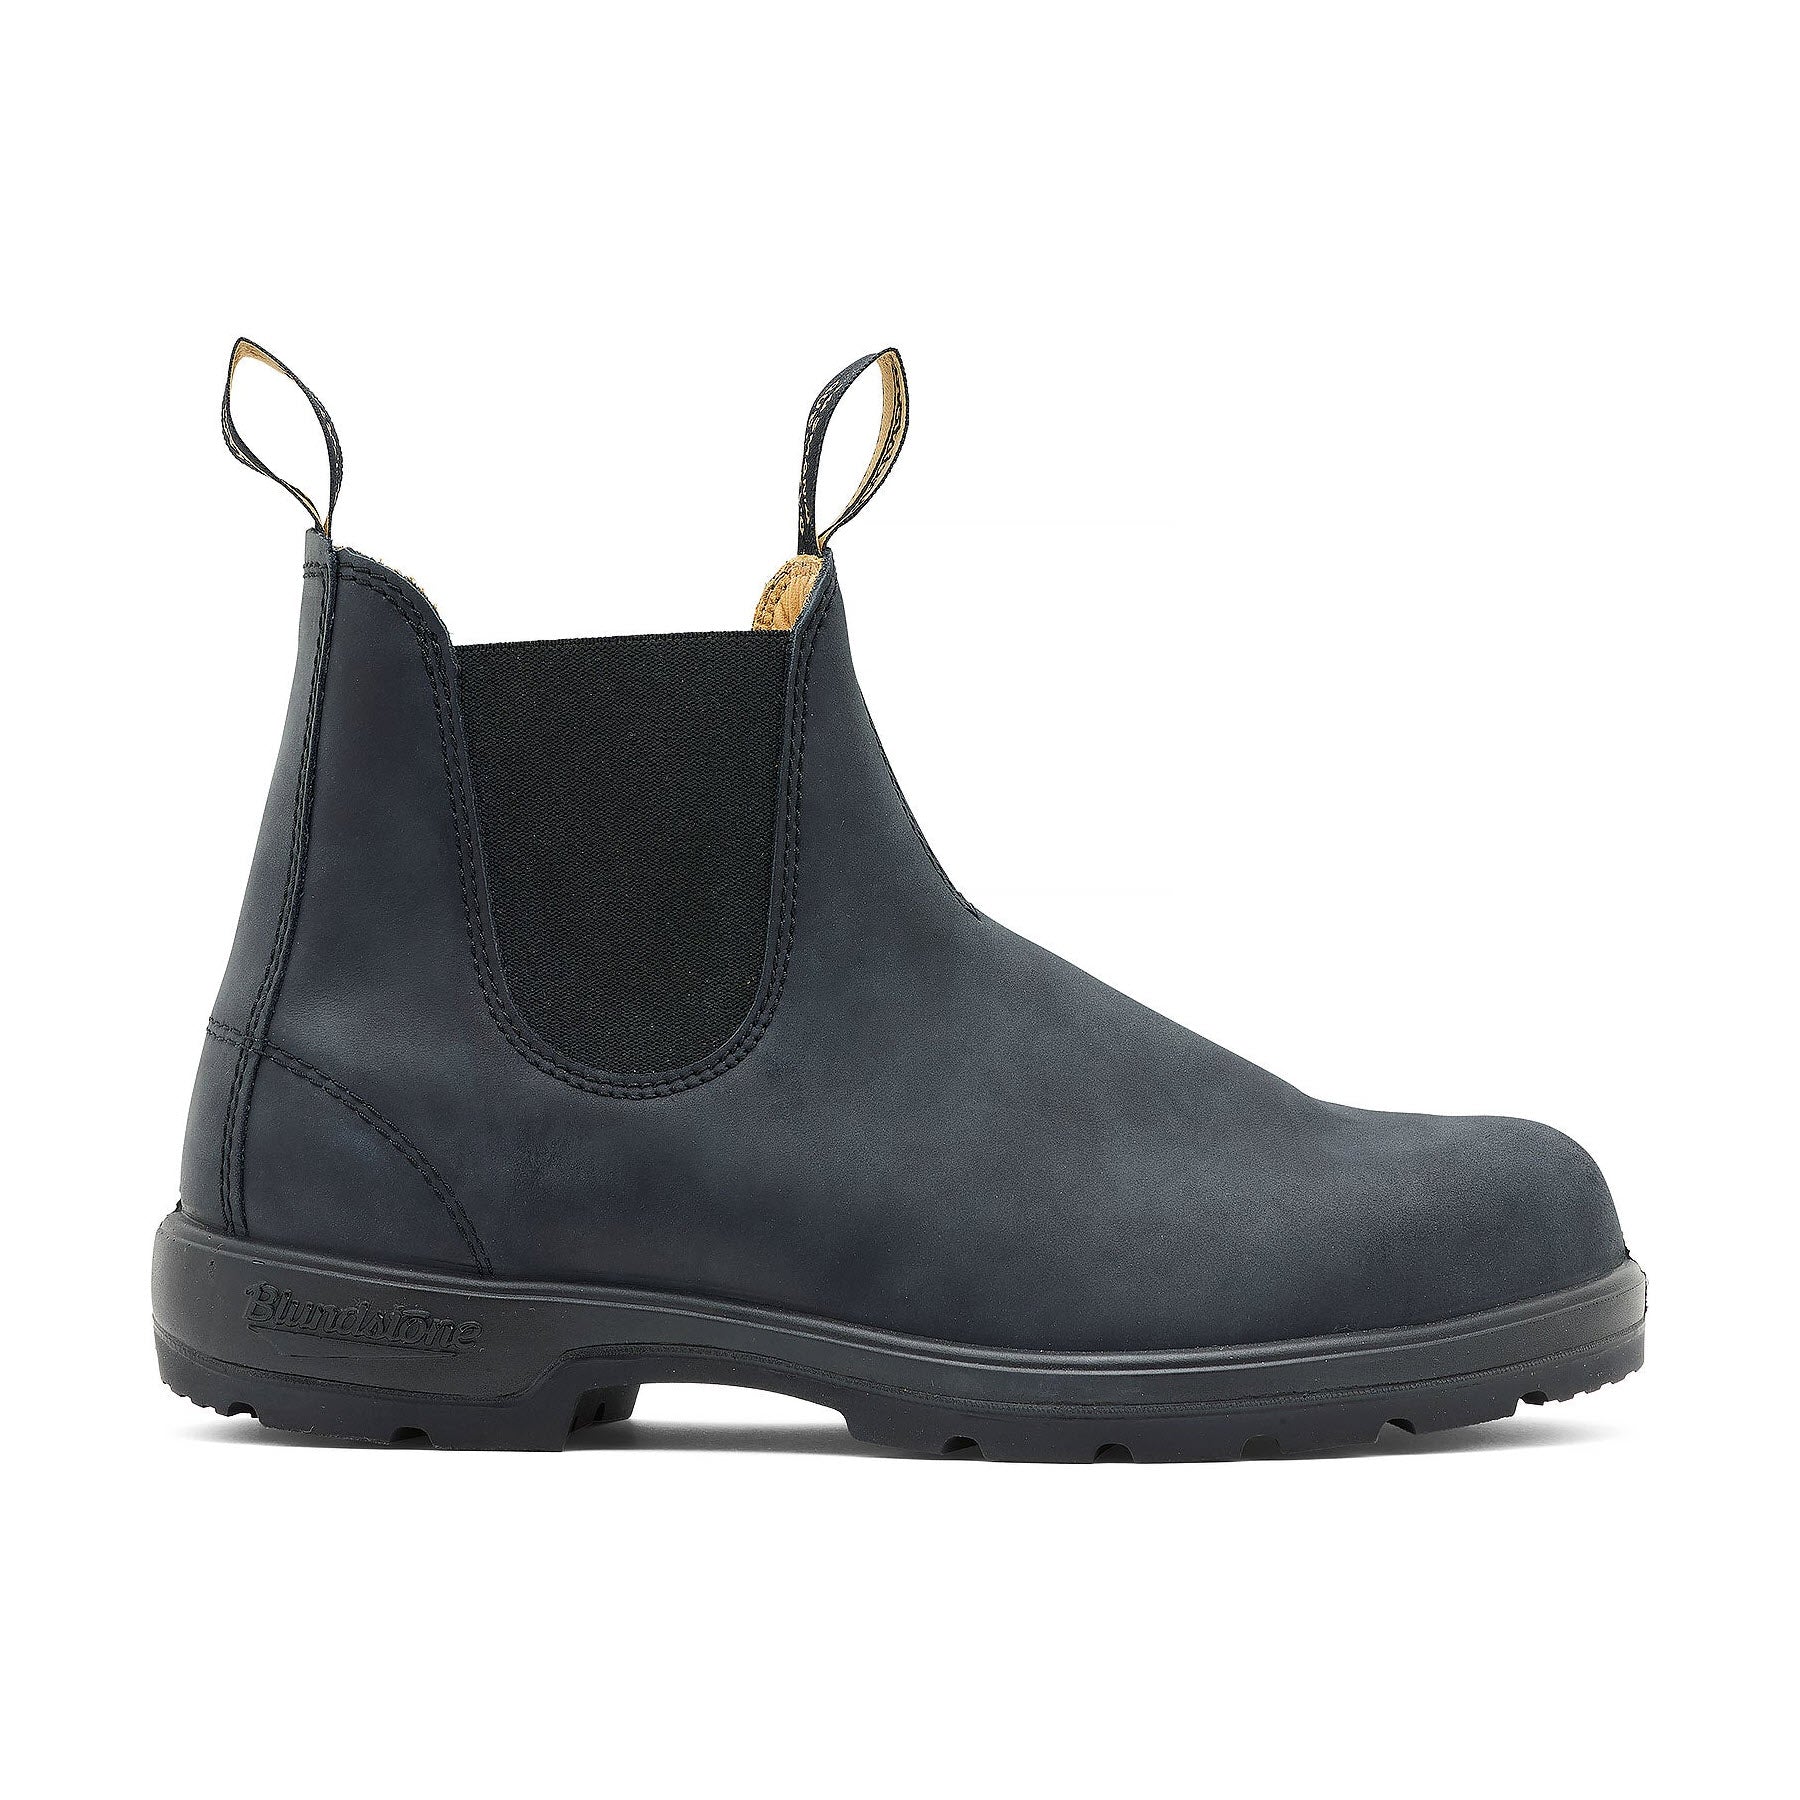 Blundstone Rustic Black Leather Chelsea boot with pull tabs and a thermo-urethane outsole.